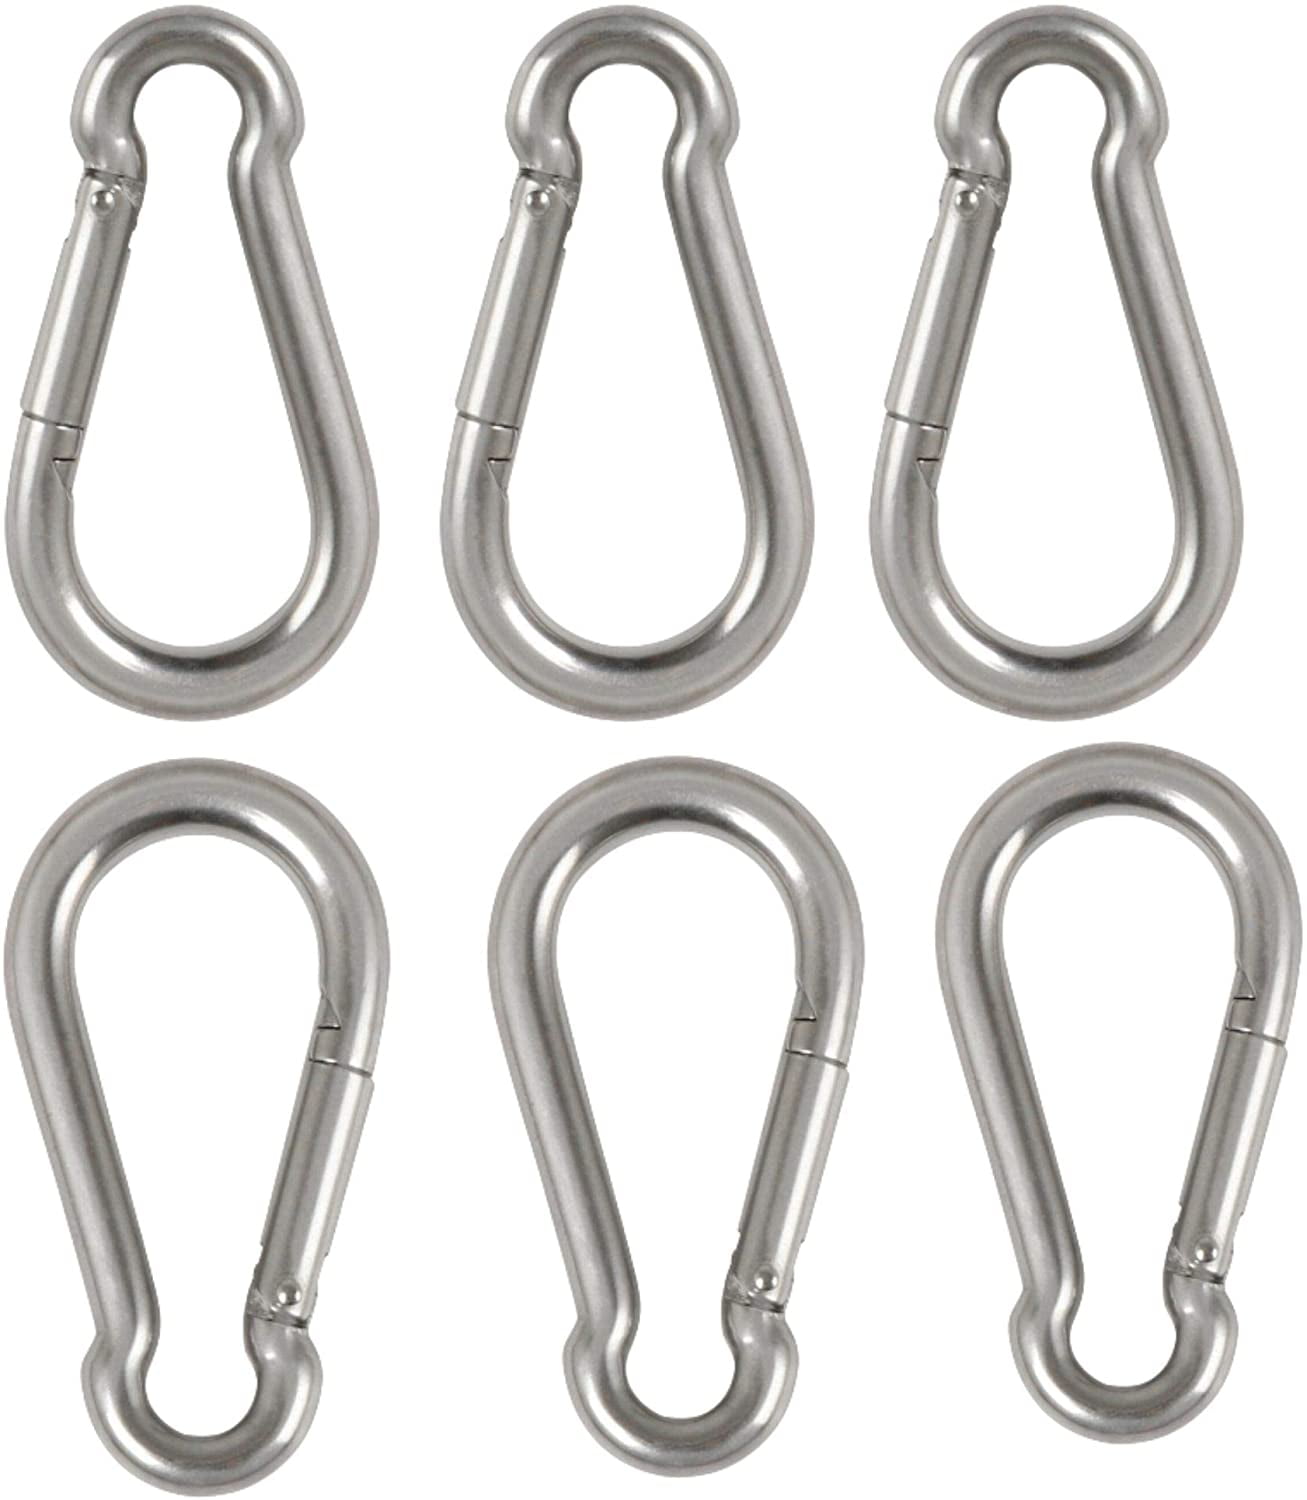 8 MM- Spring Loaded Quick Release Steel Snap Link Hooks 5/16 Dia 3 1/4 x 1-1/2 Heavy Duty Multipurpose Carabiners. Pack of 4 